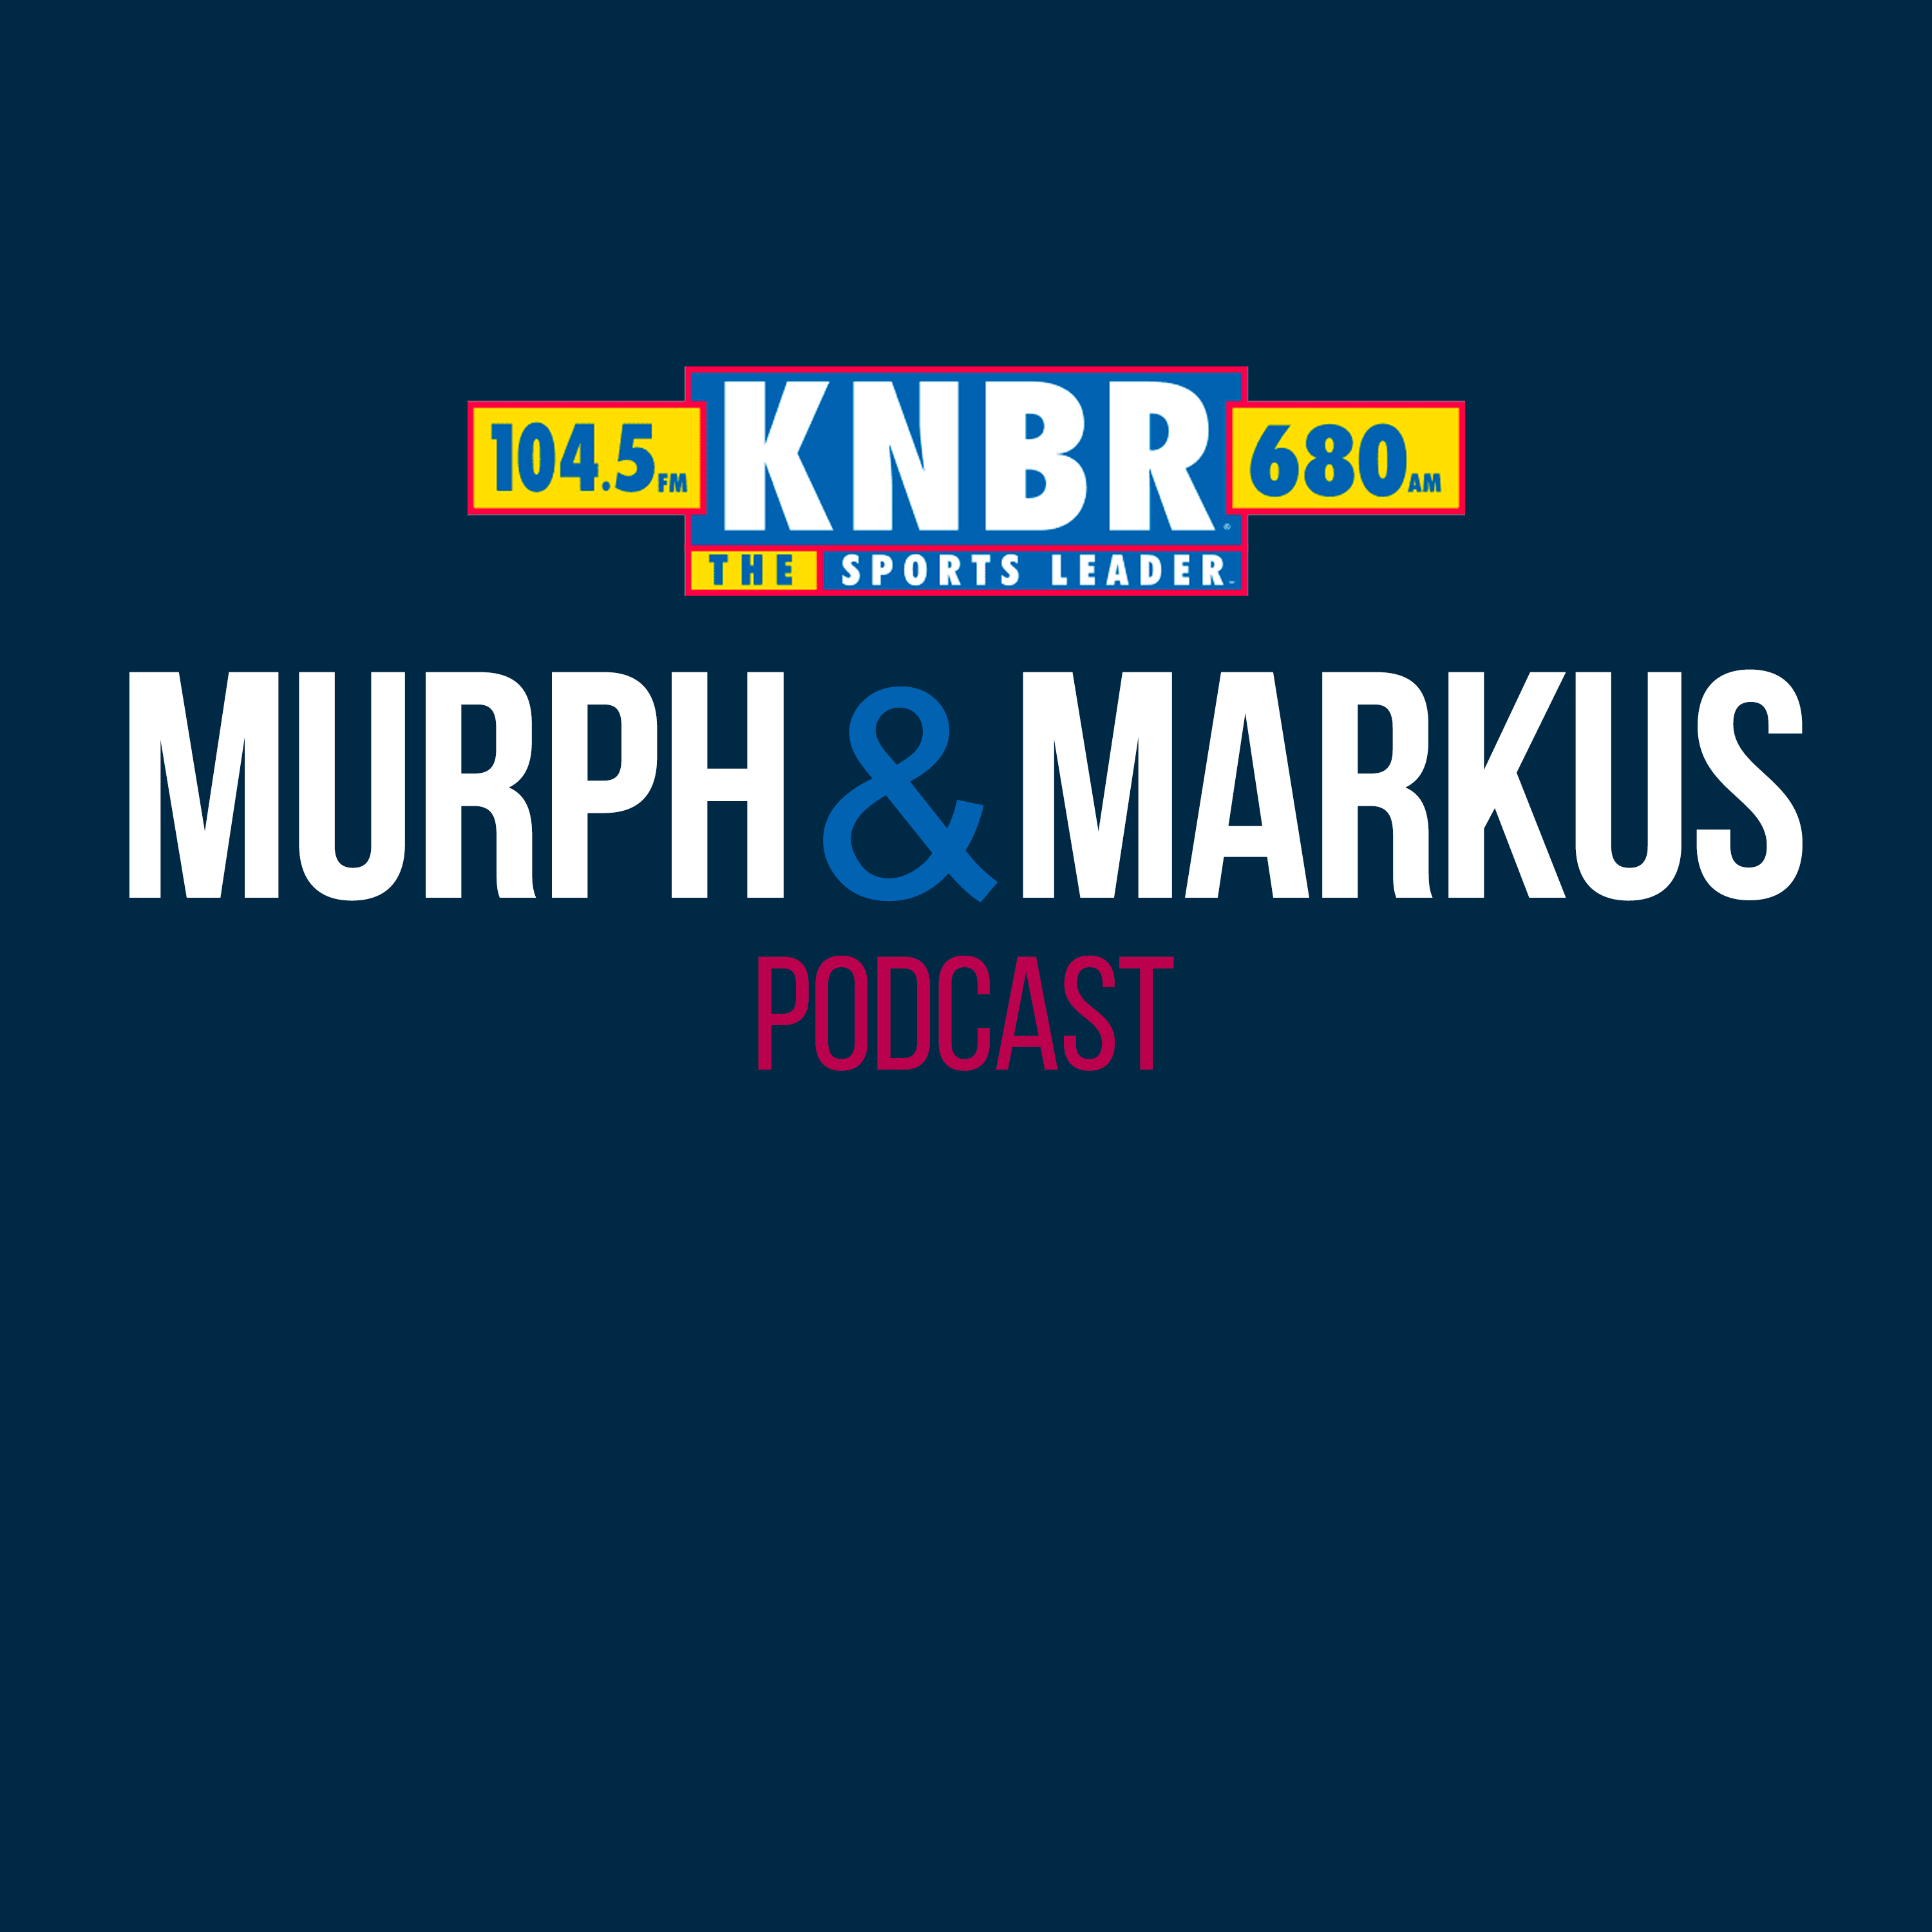 4-2 Hour 4: Murph & Markus talk to Marc Spears, react to some of his key comments, and close the show